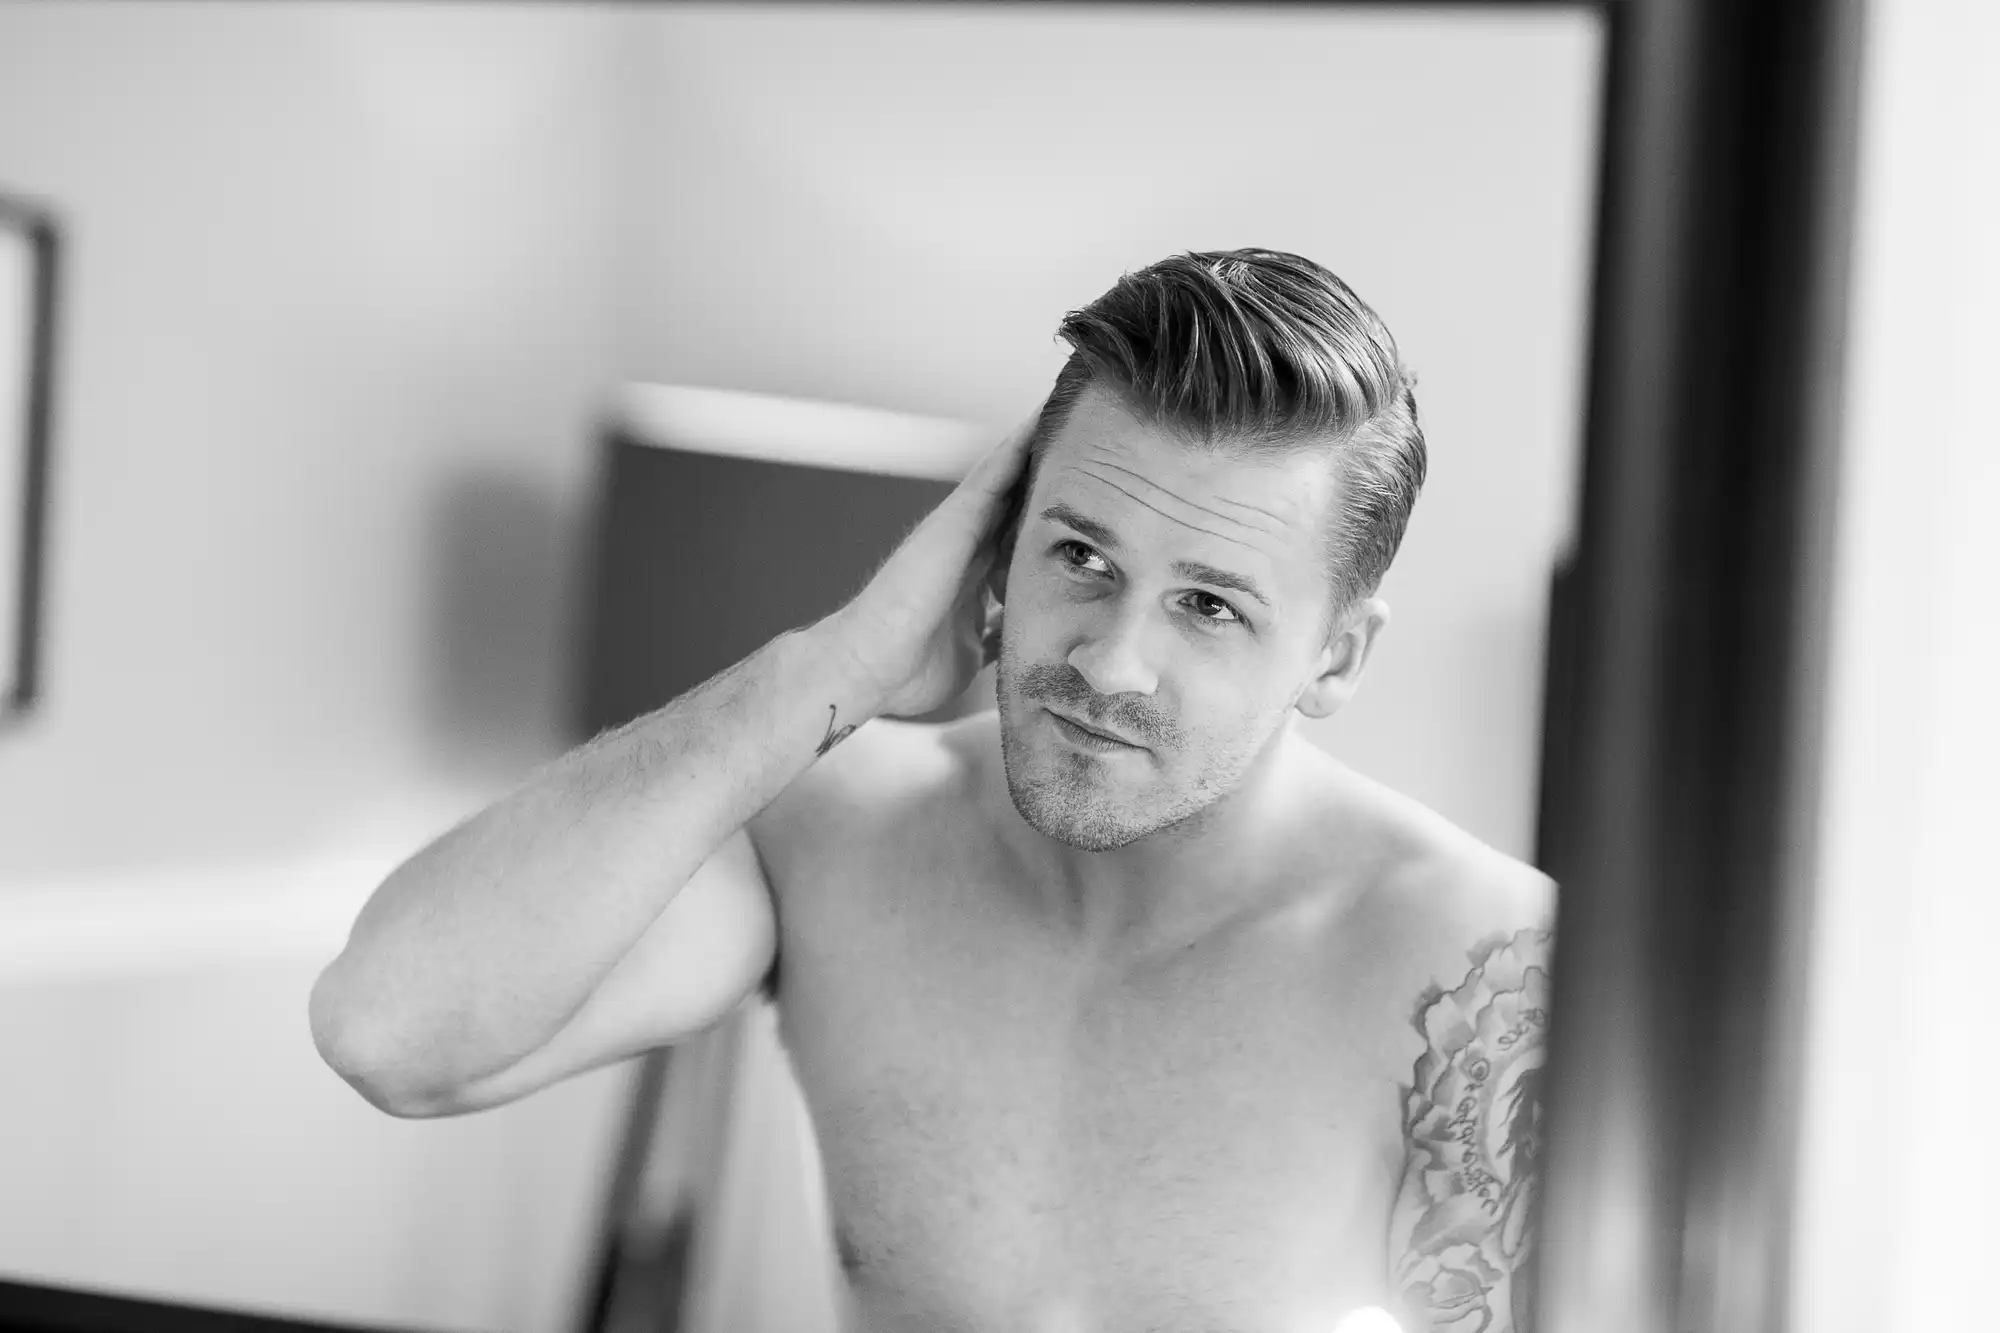 Black-and-white photo of a shirtless man with a slicked-back hairstyle and a tattoo, looking at his reflection in a mirror and touching his hair.